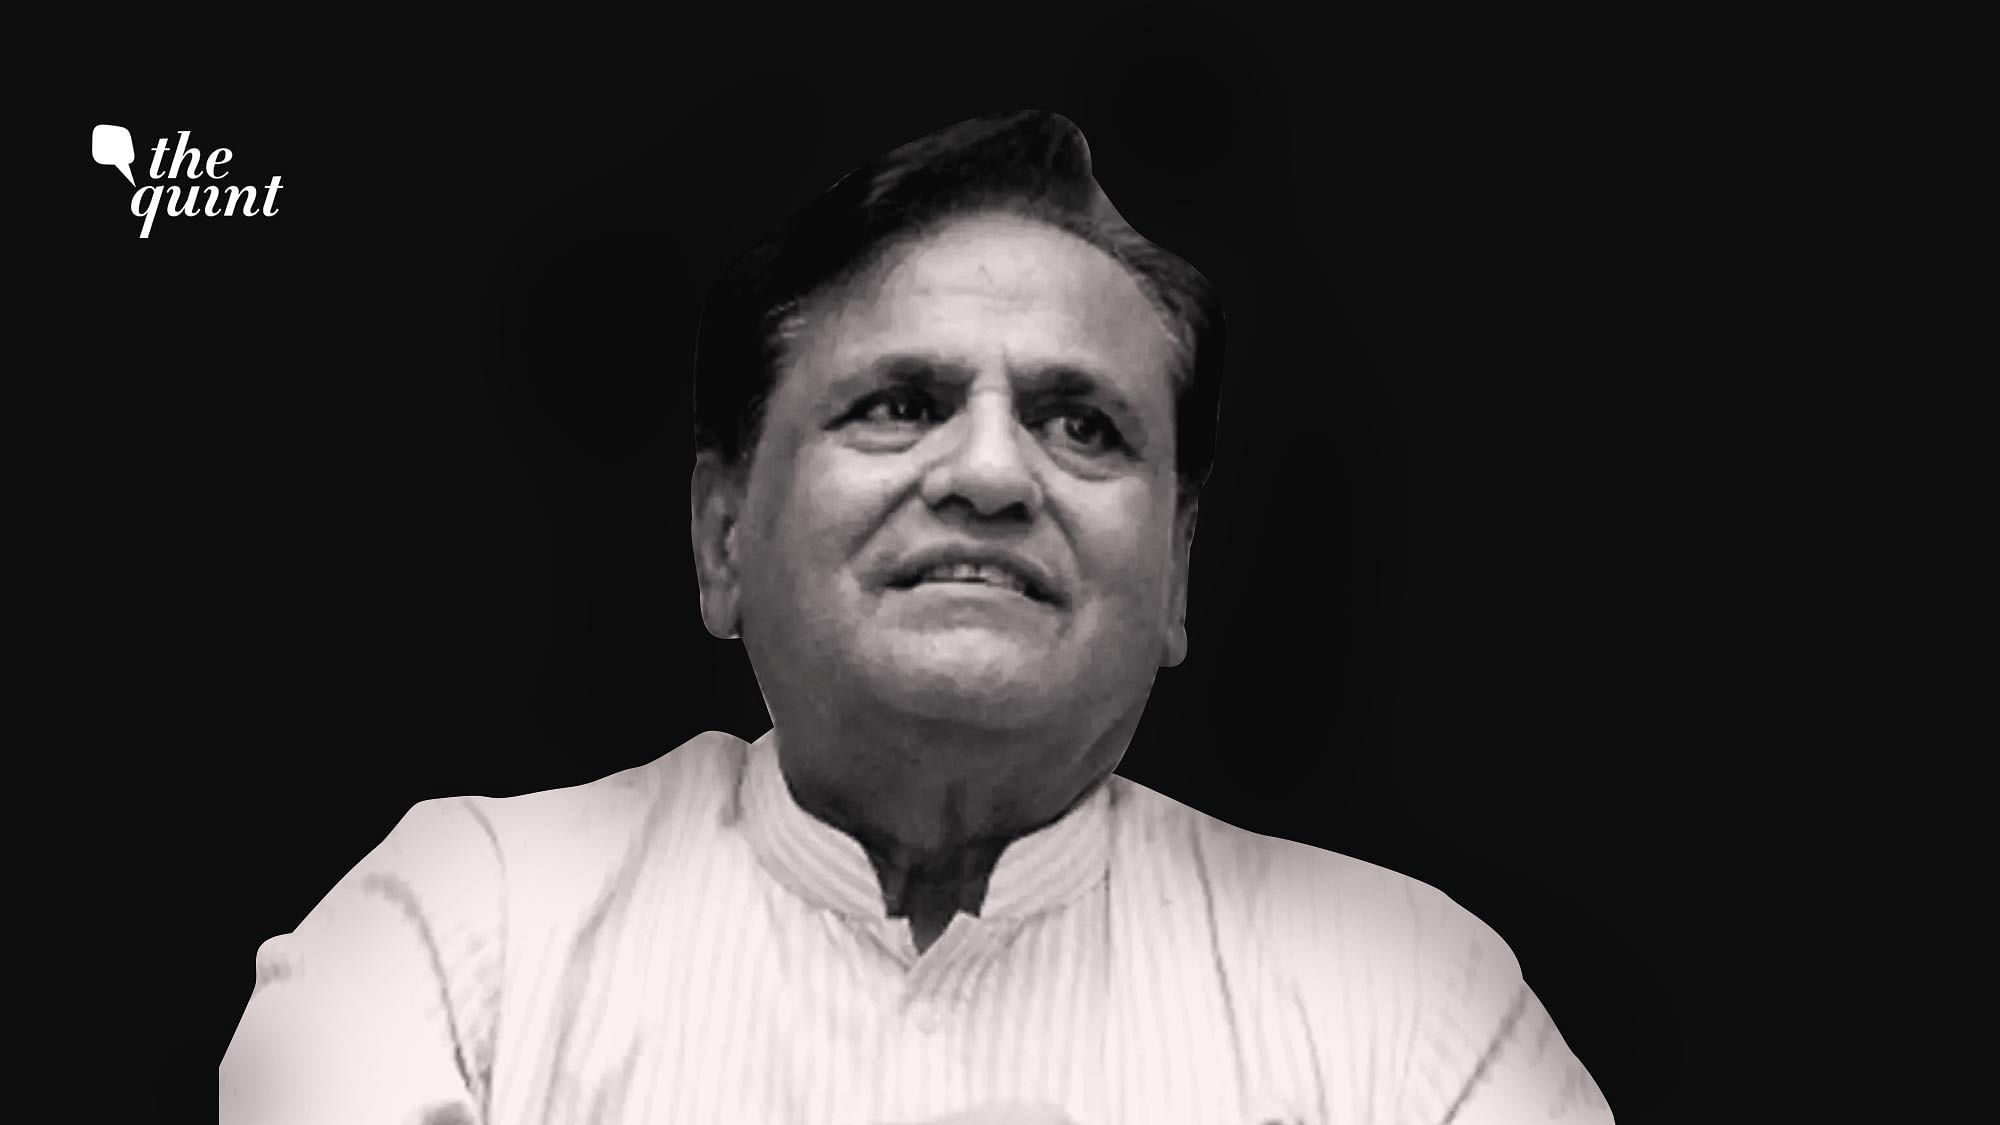 For a person who is said to have wielded immense power, Ahmed Patel functioned quietly and with decency.